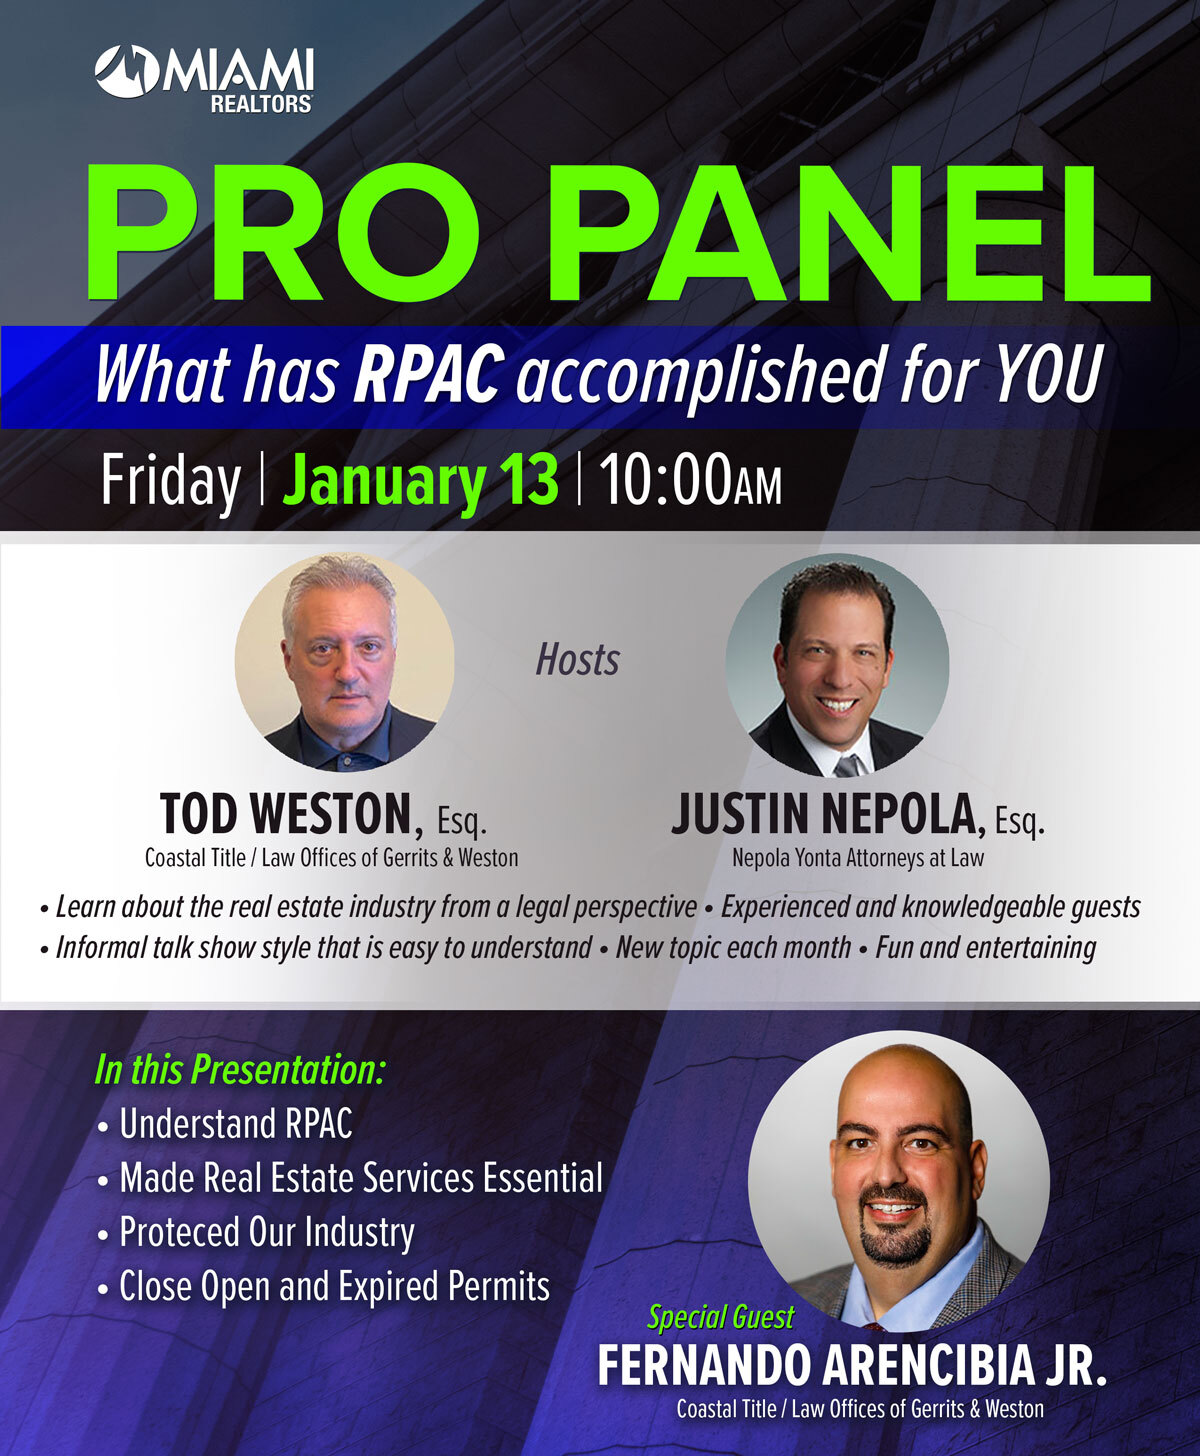 Pro Panel What has RPAC accomplished for YOU